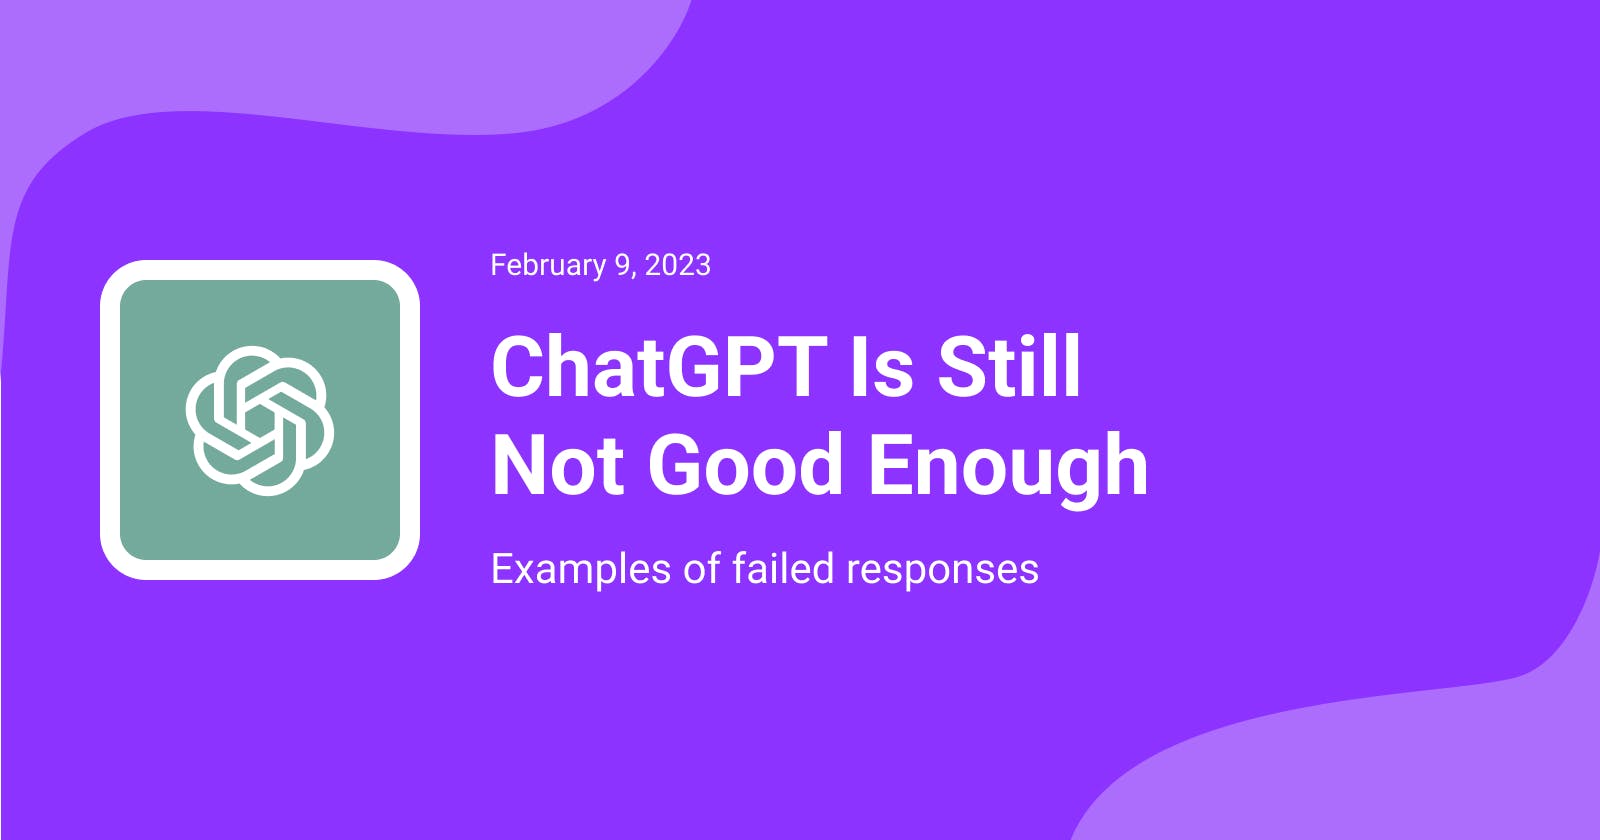 ChatGPT Is Still Not Good Enough